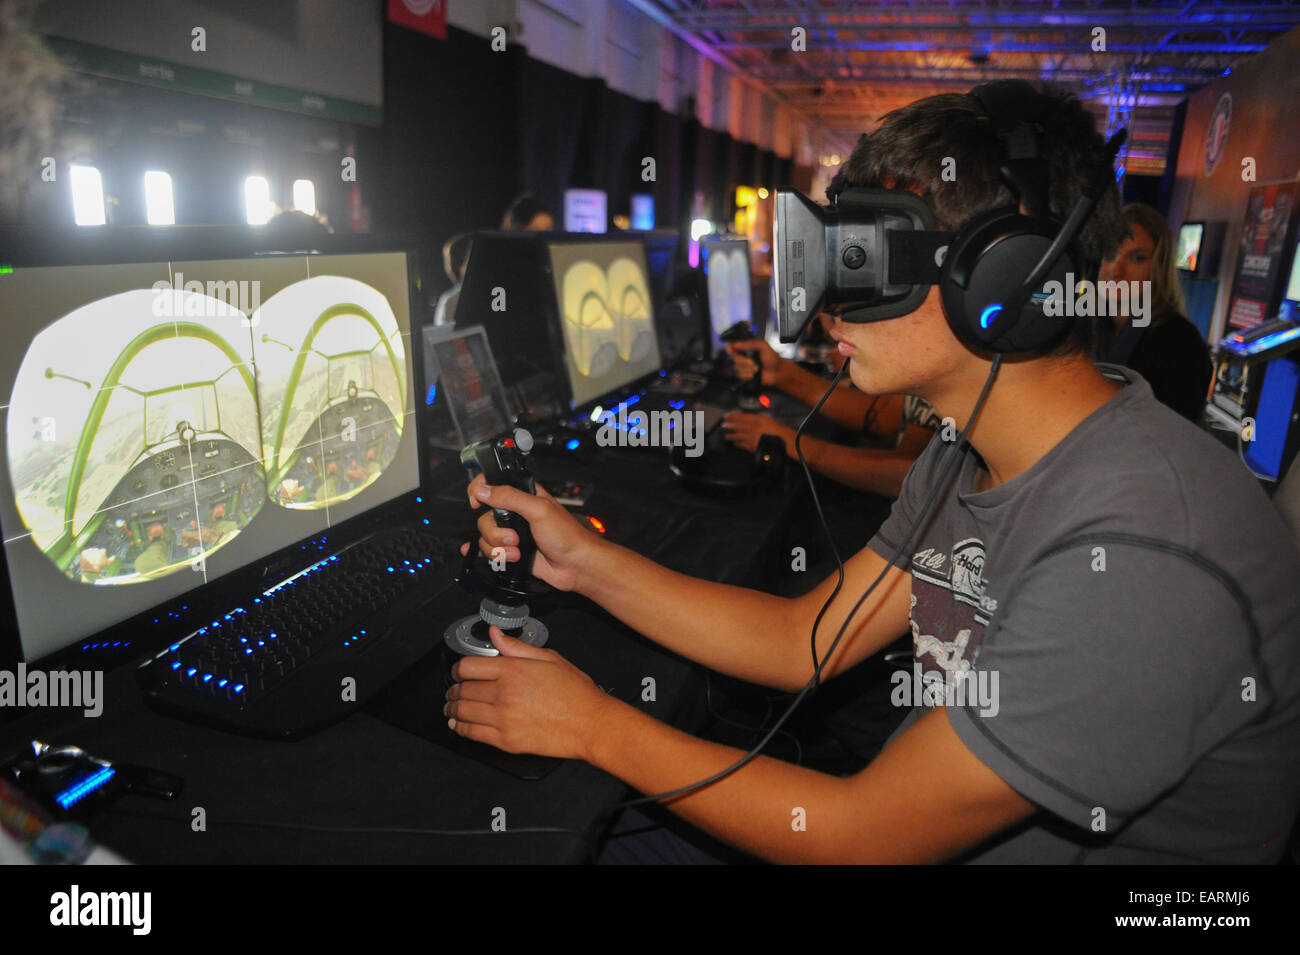 August 13, 2014 - Paris, France:  A video game player tries the Oculus Rift, a 3D virtual reality headset. The computer screen d Stock Photo